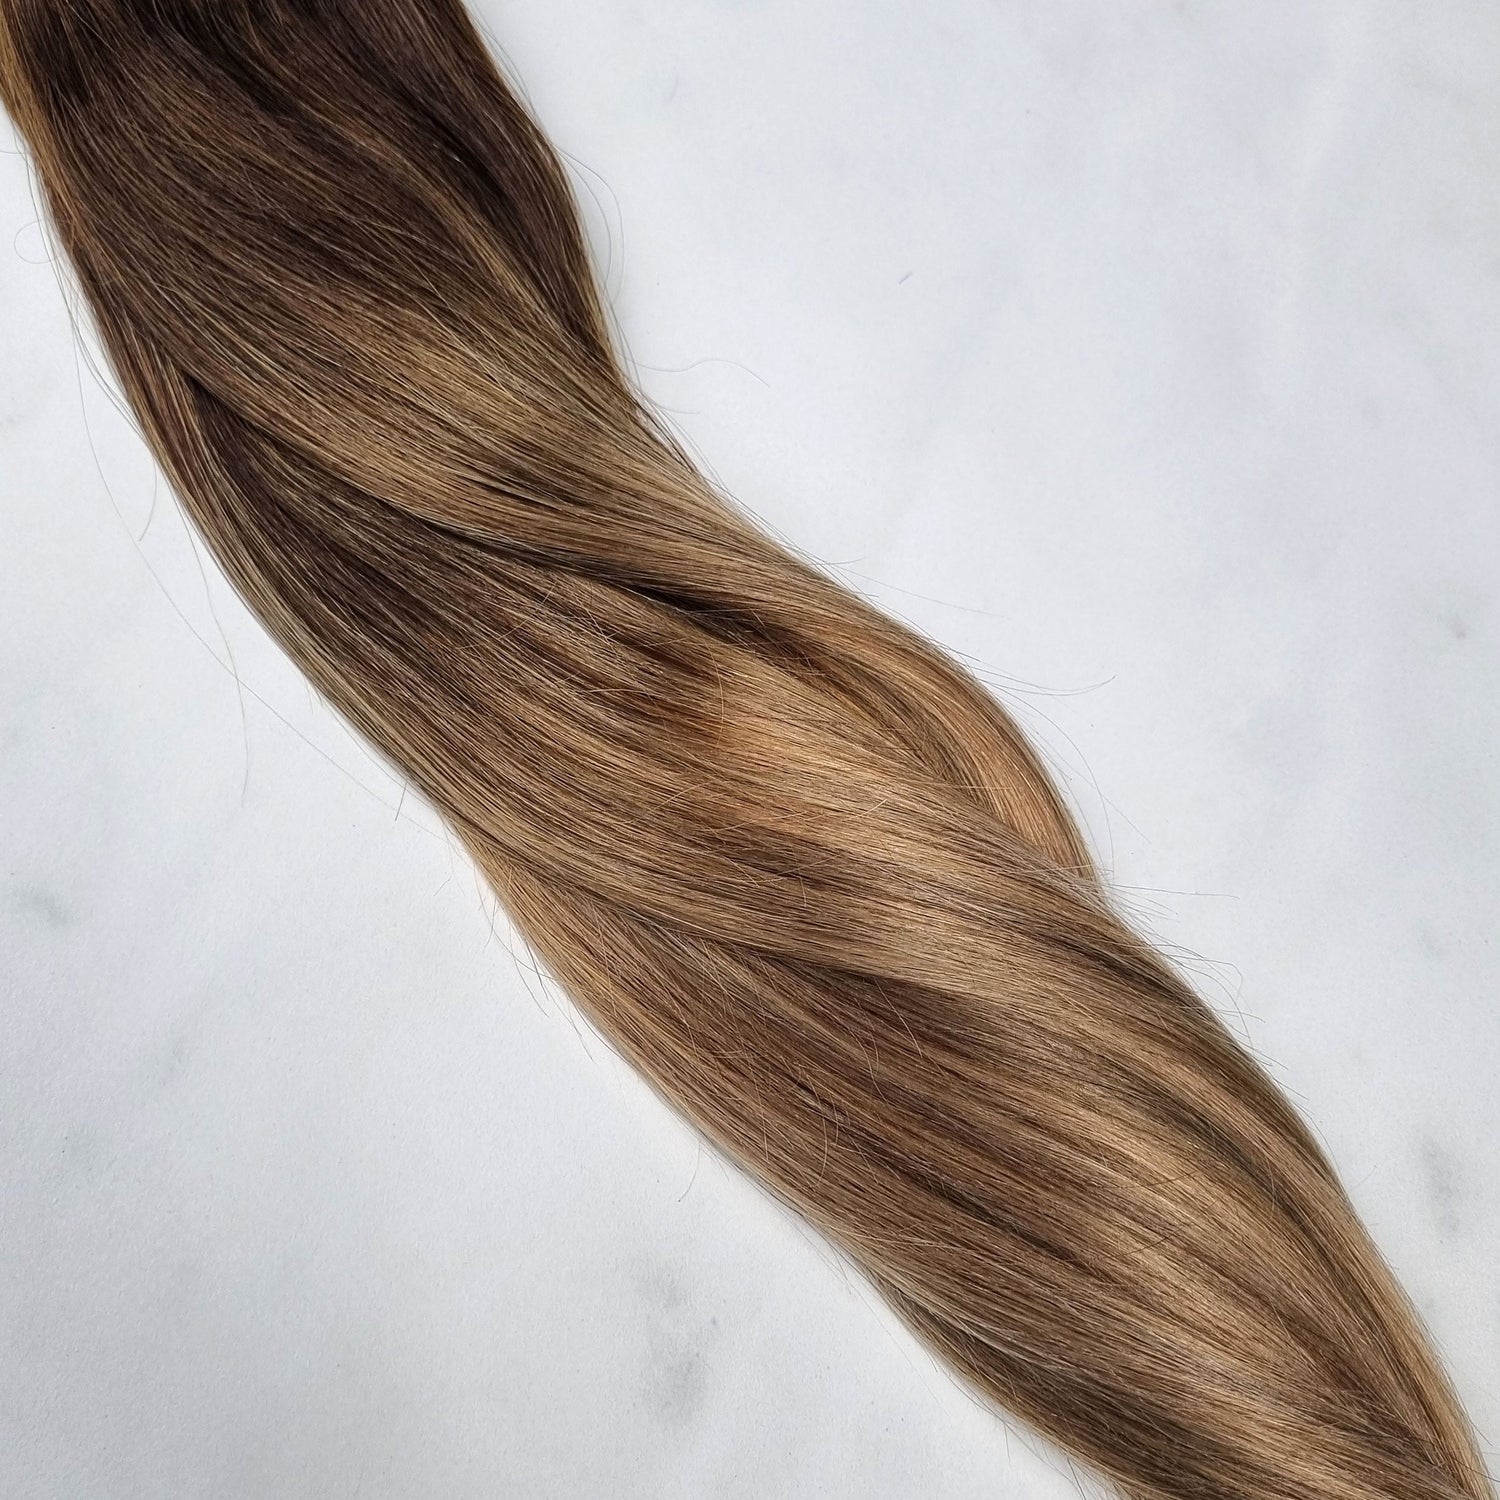 Cream Balayage quad weft hairextensions🍦 30cm - 70g